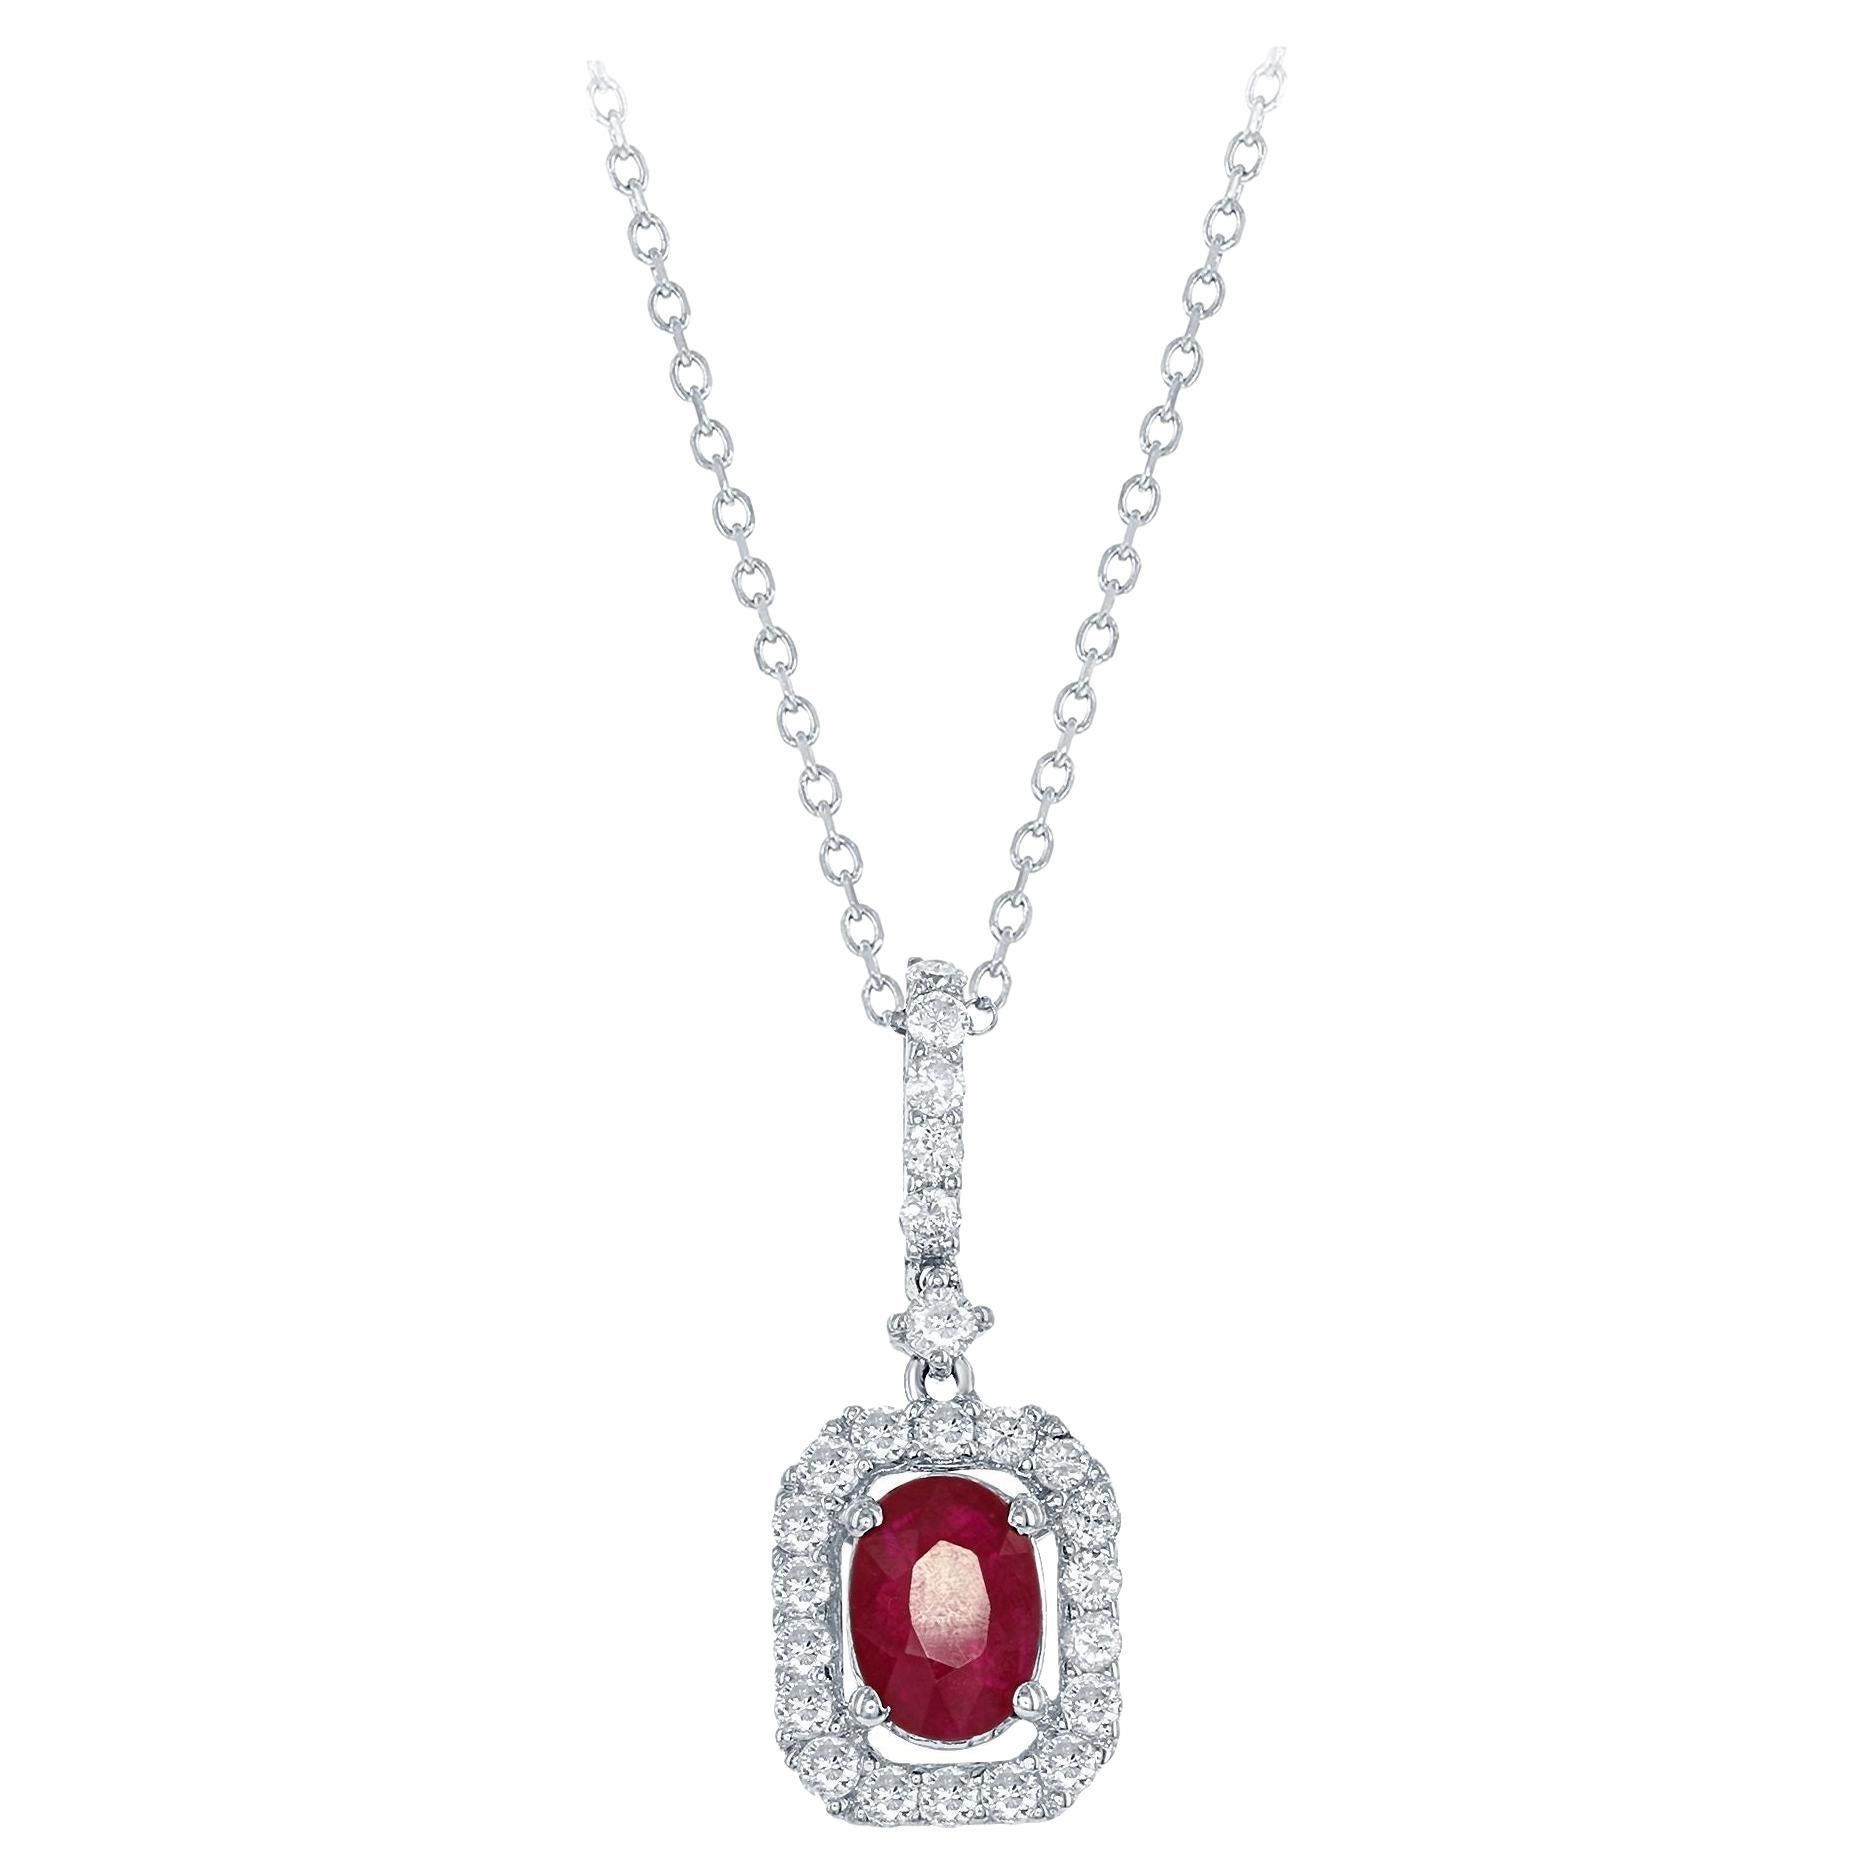 Diana M. 1.00 Carat Oval Cut Ruby and Diamond Halo Pendant For Sale